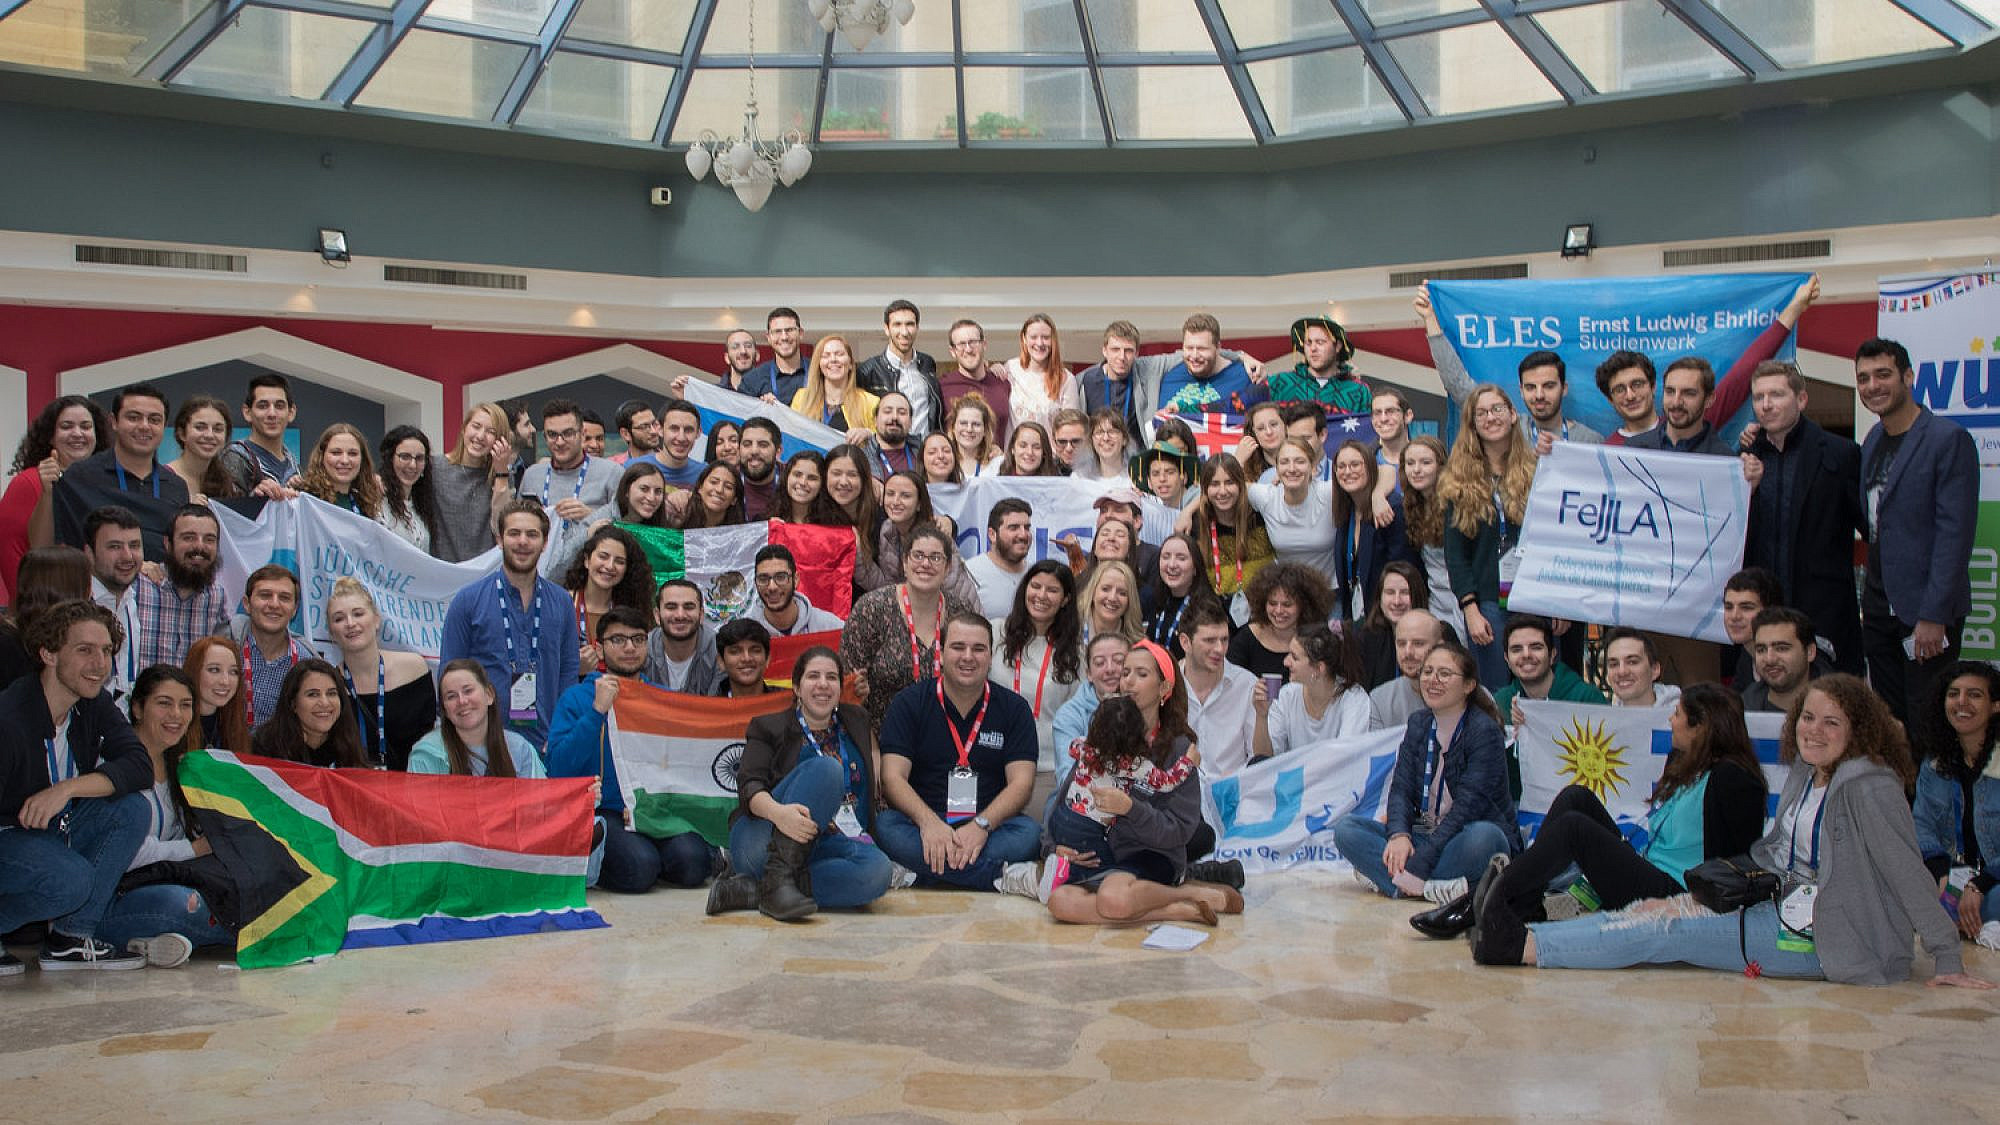 Student leaders from around the world at the recent 44th World Union of Jewish Students (WUJS) congress in Jerusalem. Credit: WUJS.